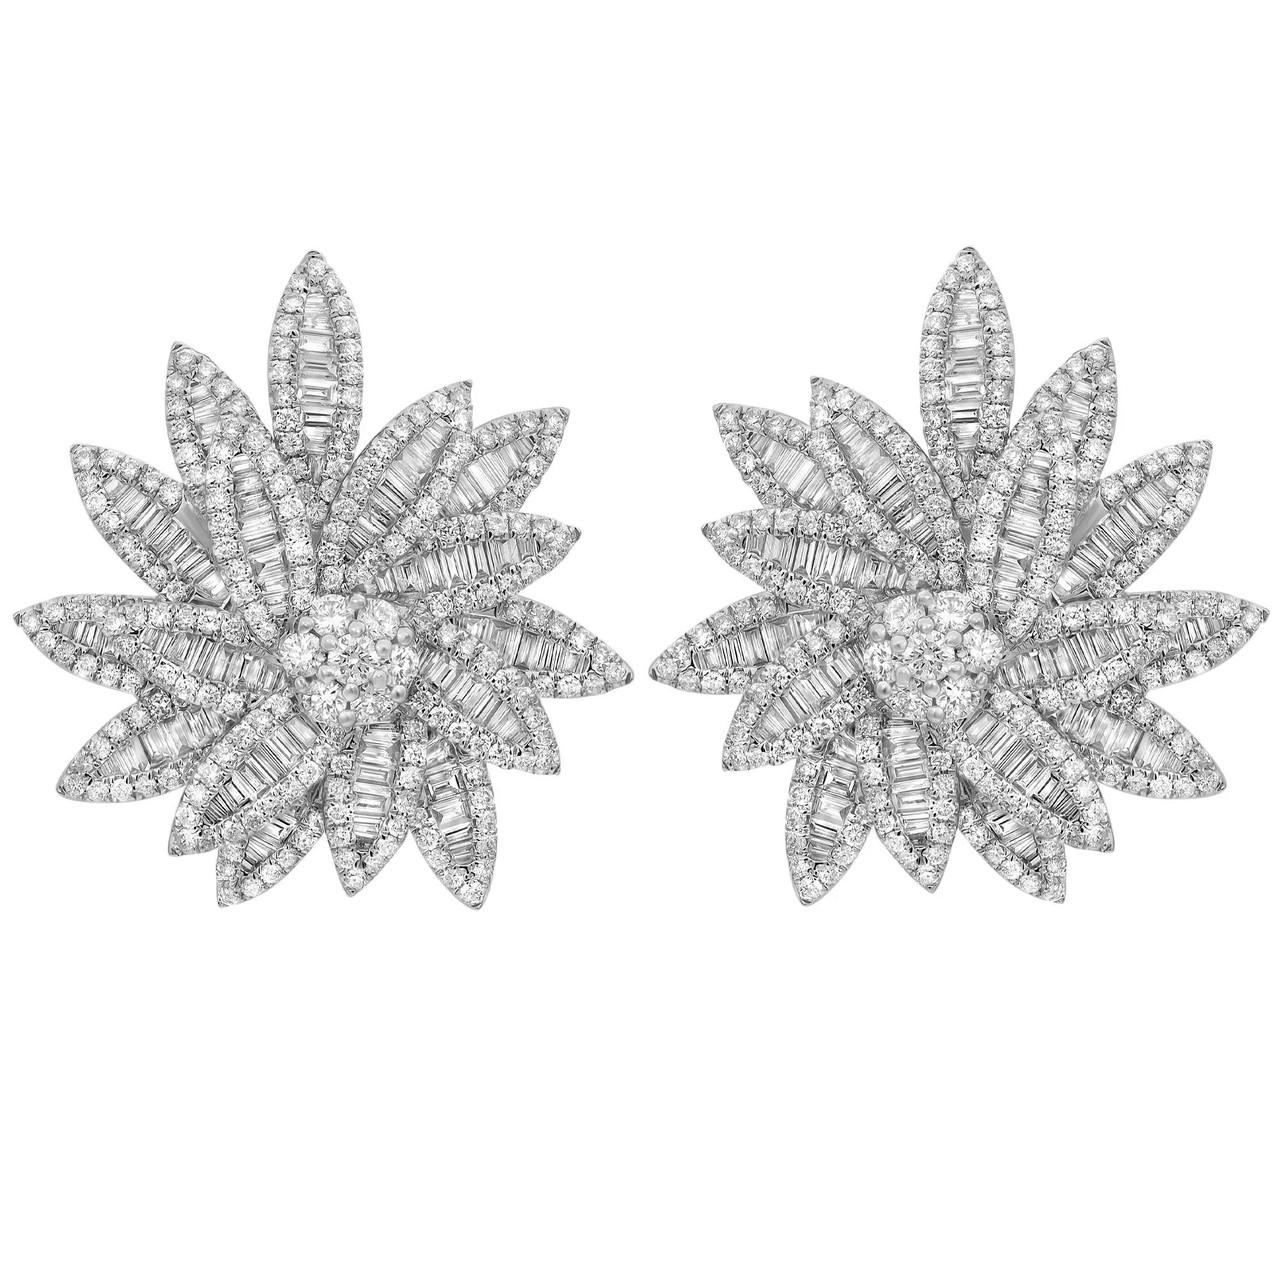 4.15 Carat Baguette and Round Cut Diamond Flower Earrings 18K White Gold  In New Condition For Sale In New York, NY